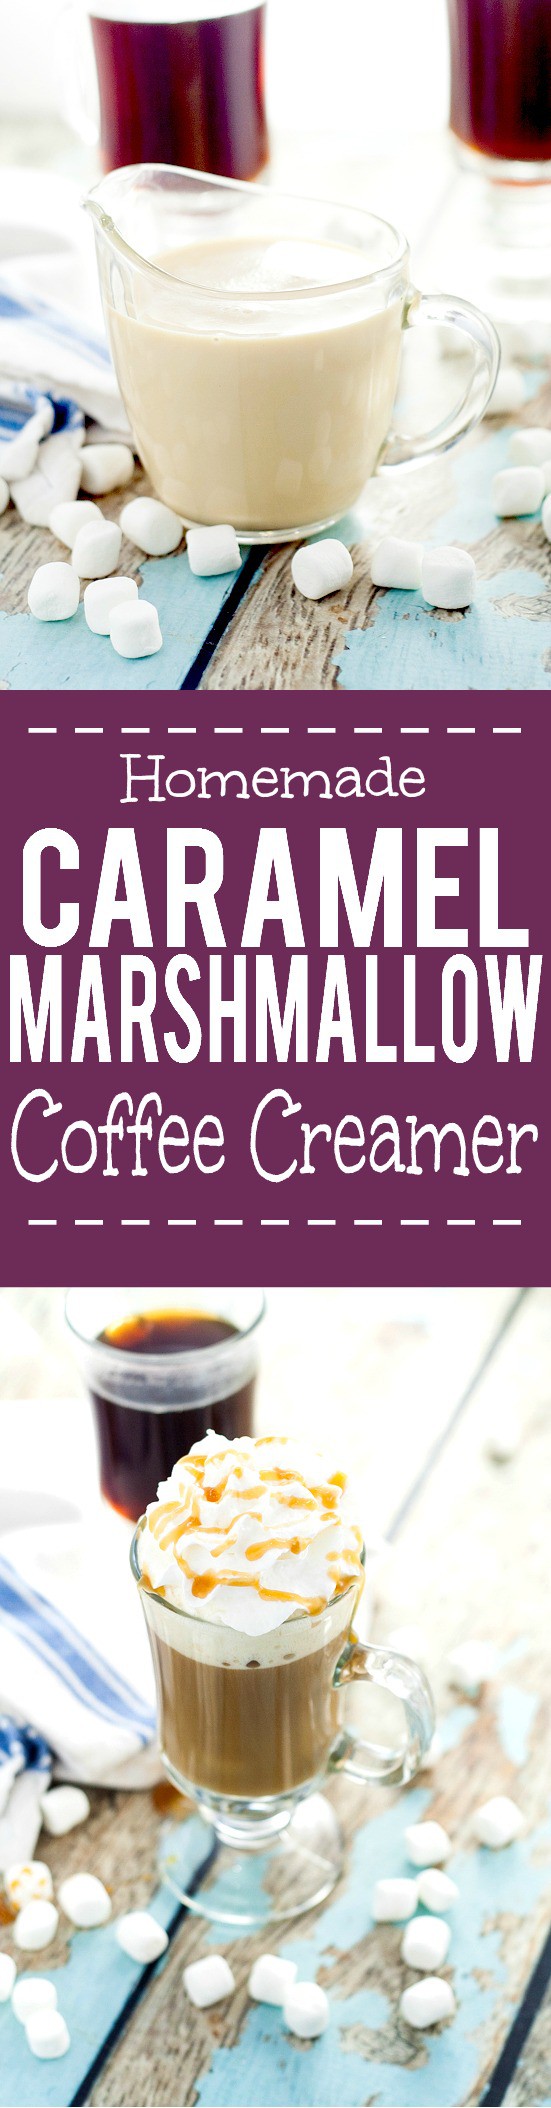 Homemade Caramel Marshmallow Coffee Creamer recipe - Light and creamy marshmallow and decadently sweet caramel swirl together to make this Homemade Caramel Marshmallow Coffee Creamer perfect for your next cup of coffee. Sounds like coffee creamer heaven!